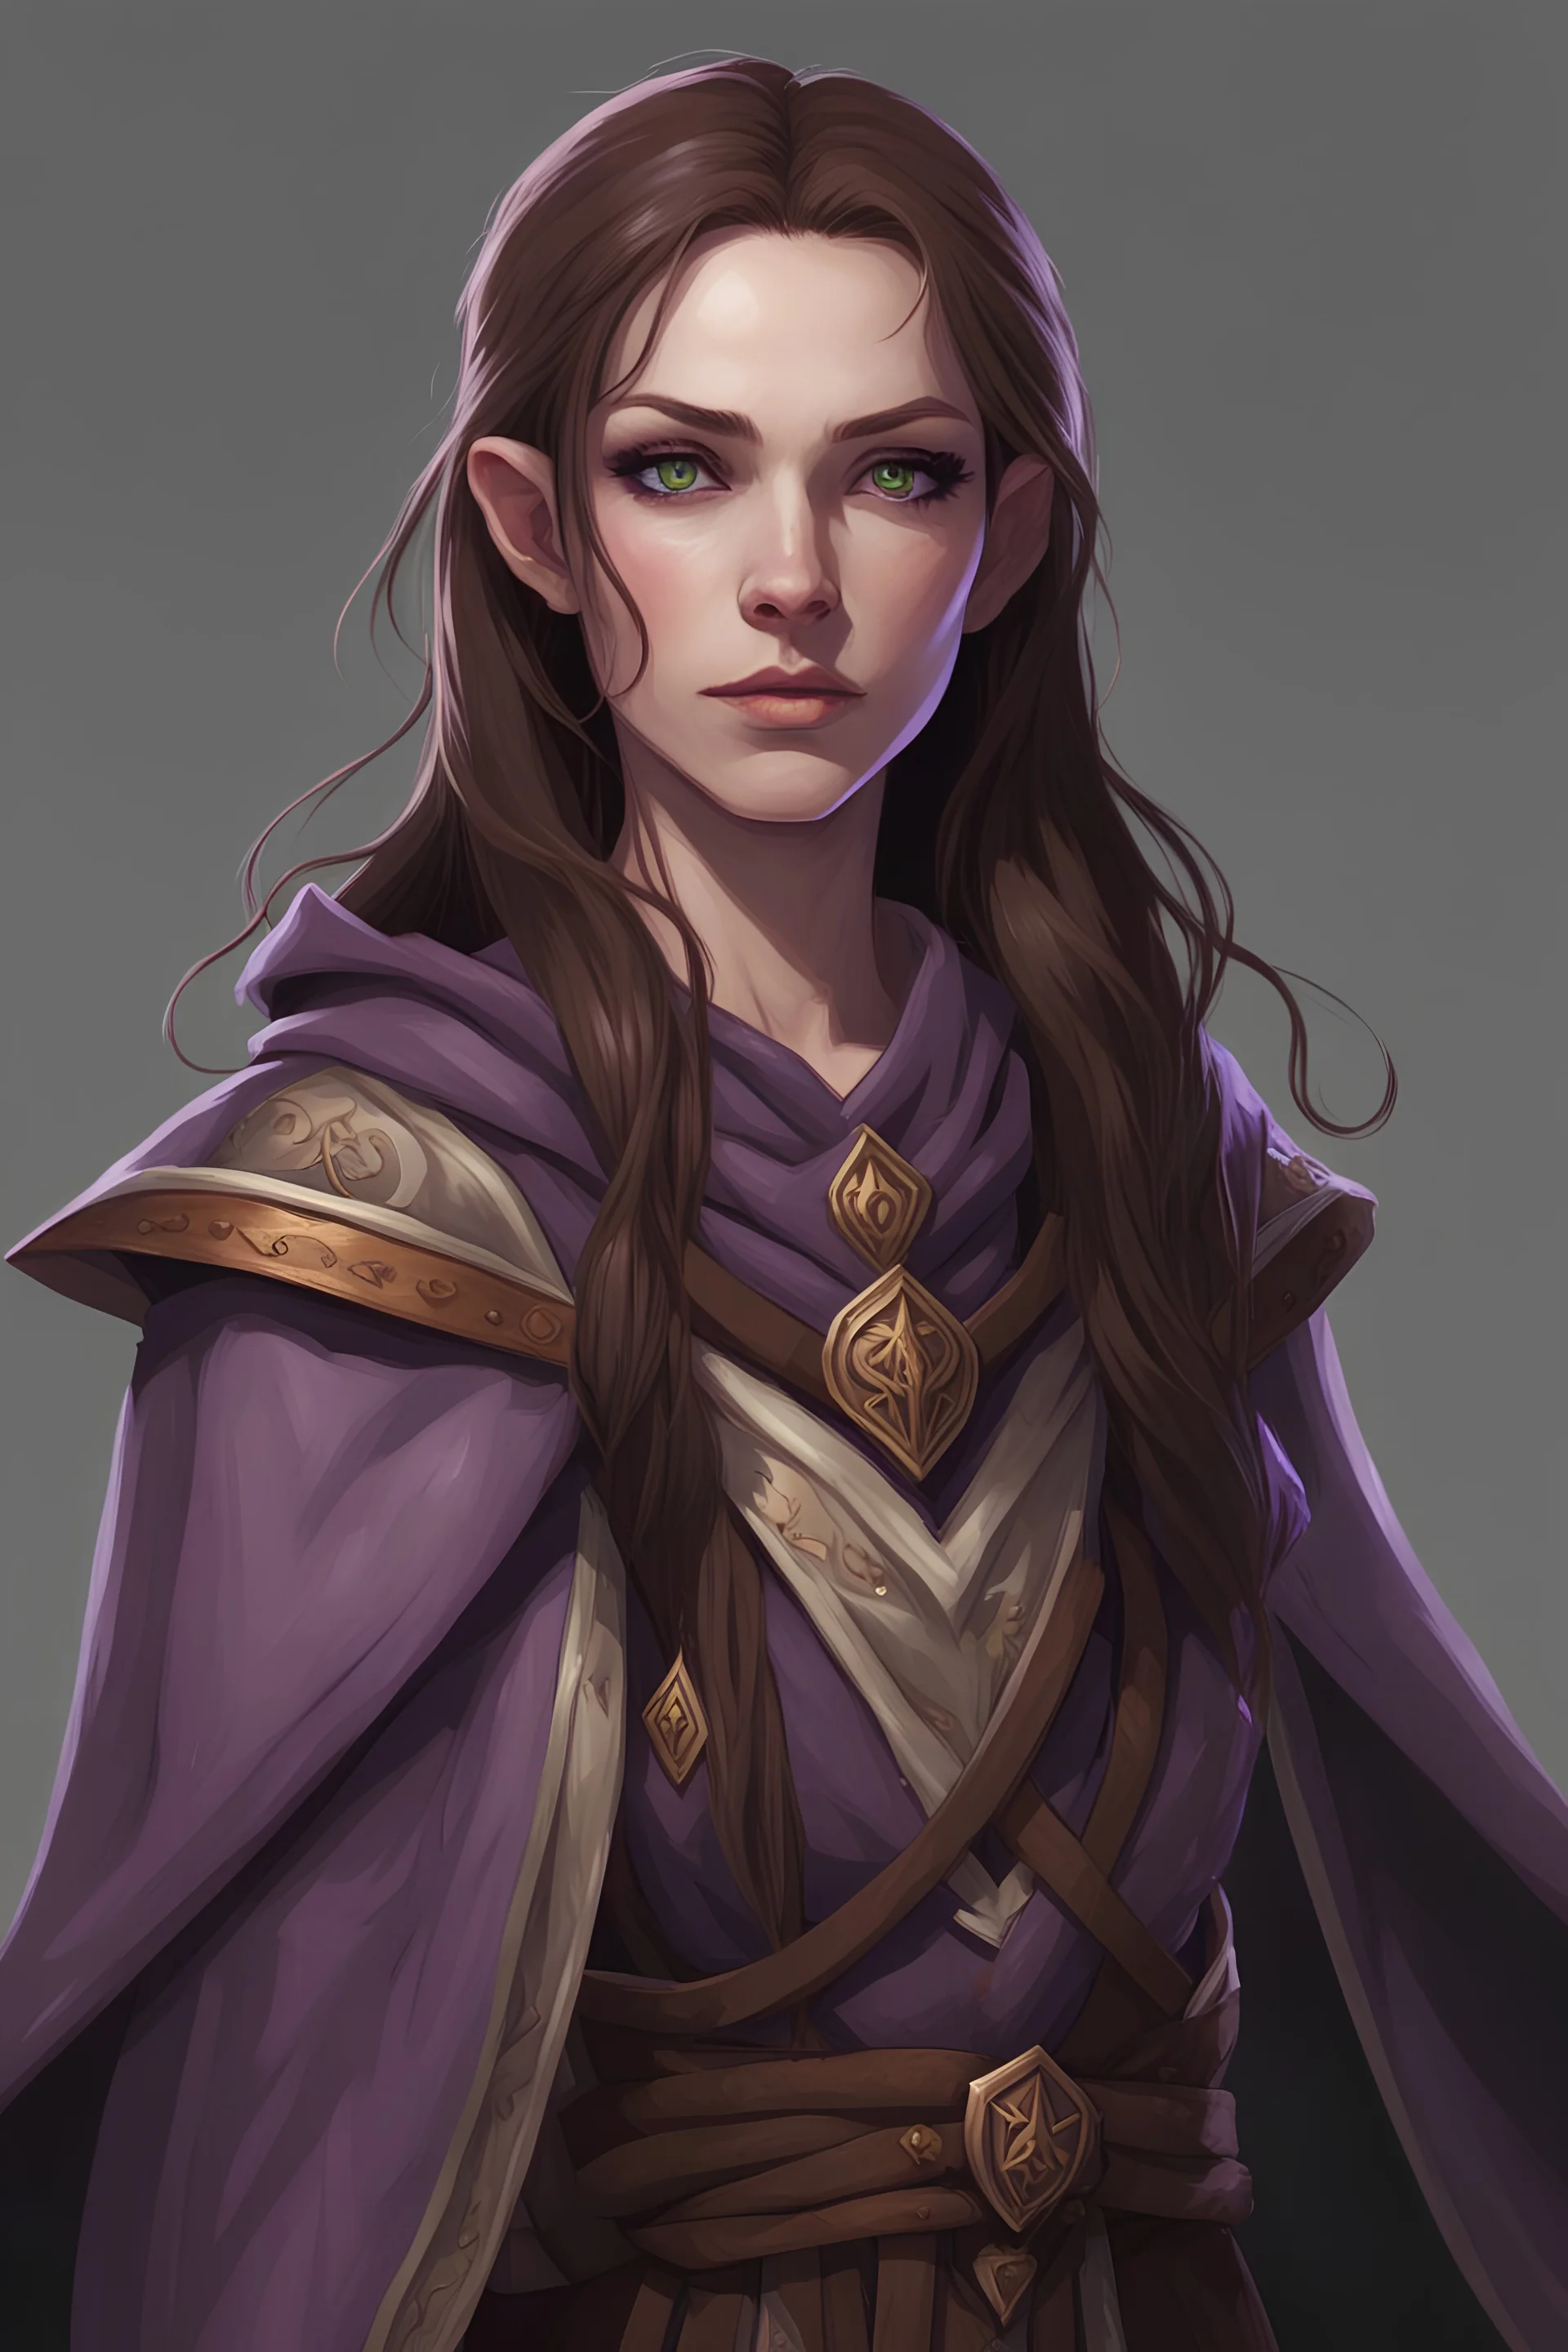 cahotic neutral charismatic Wood Elf Bard Female with pale skin and very sharp features, long brown hair, green eyes, wearing a purple vest and brown adventurer's cloak with a smug face. Lute on her back.